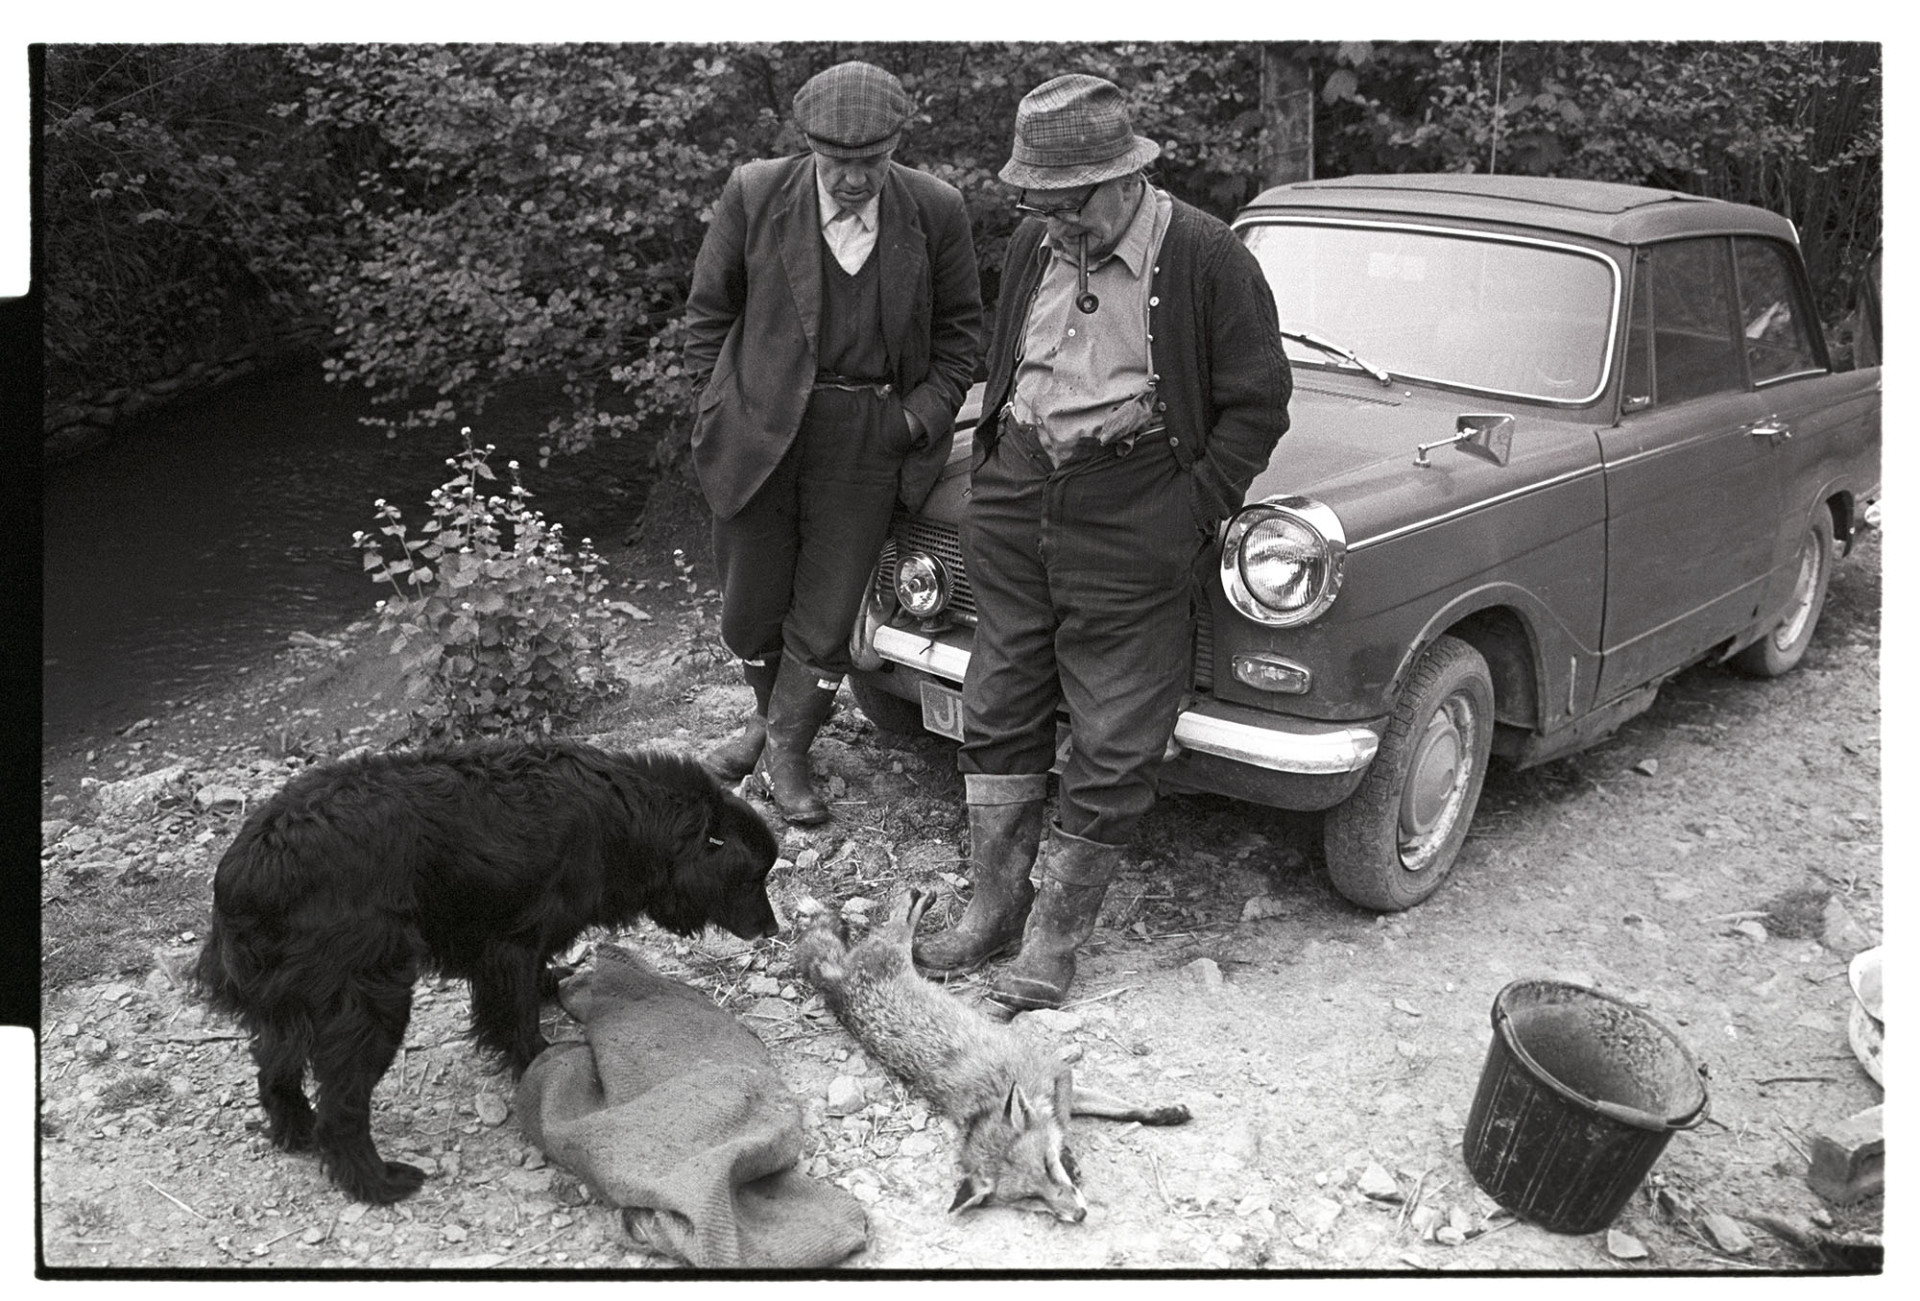 Two farmers looking at fox they had snared leaning on old car, dog. 
[Archie Parkhouse and Ivor Brock leaning on a car and looking at a fox they had snared at Millhams in Dolton. Archie Parkhouse is smoking a pipe. A dog is also looking at the fox.]